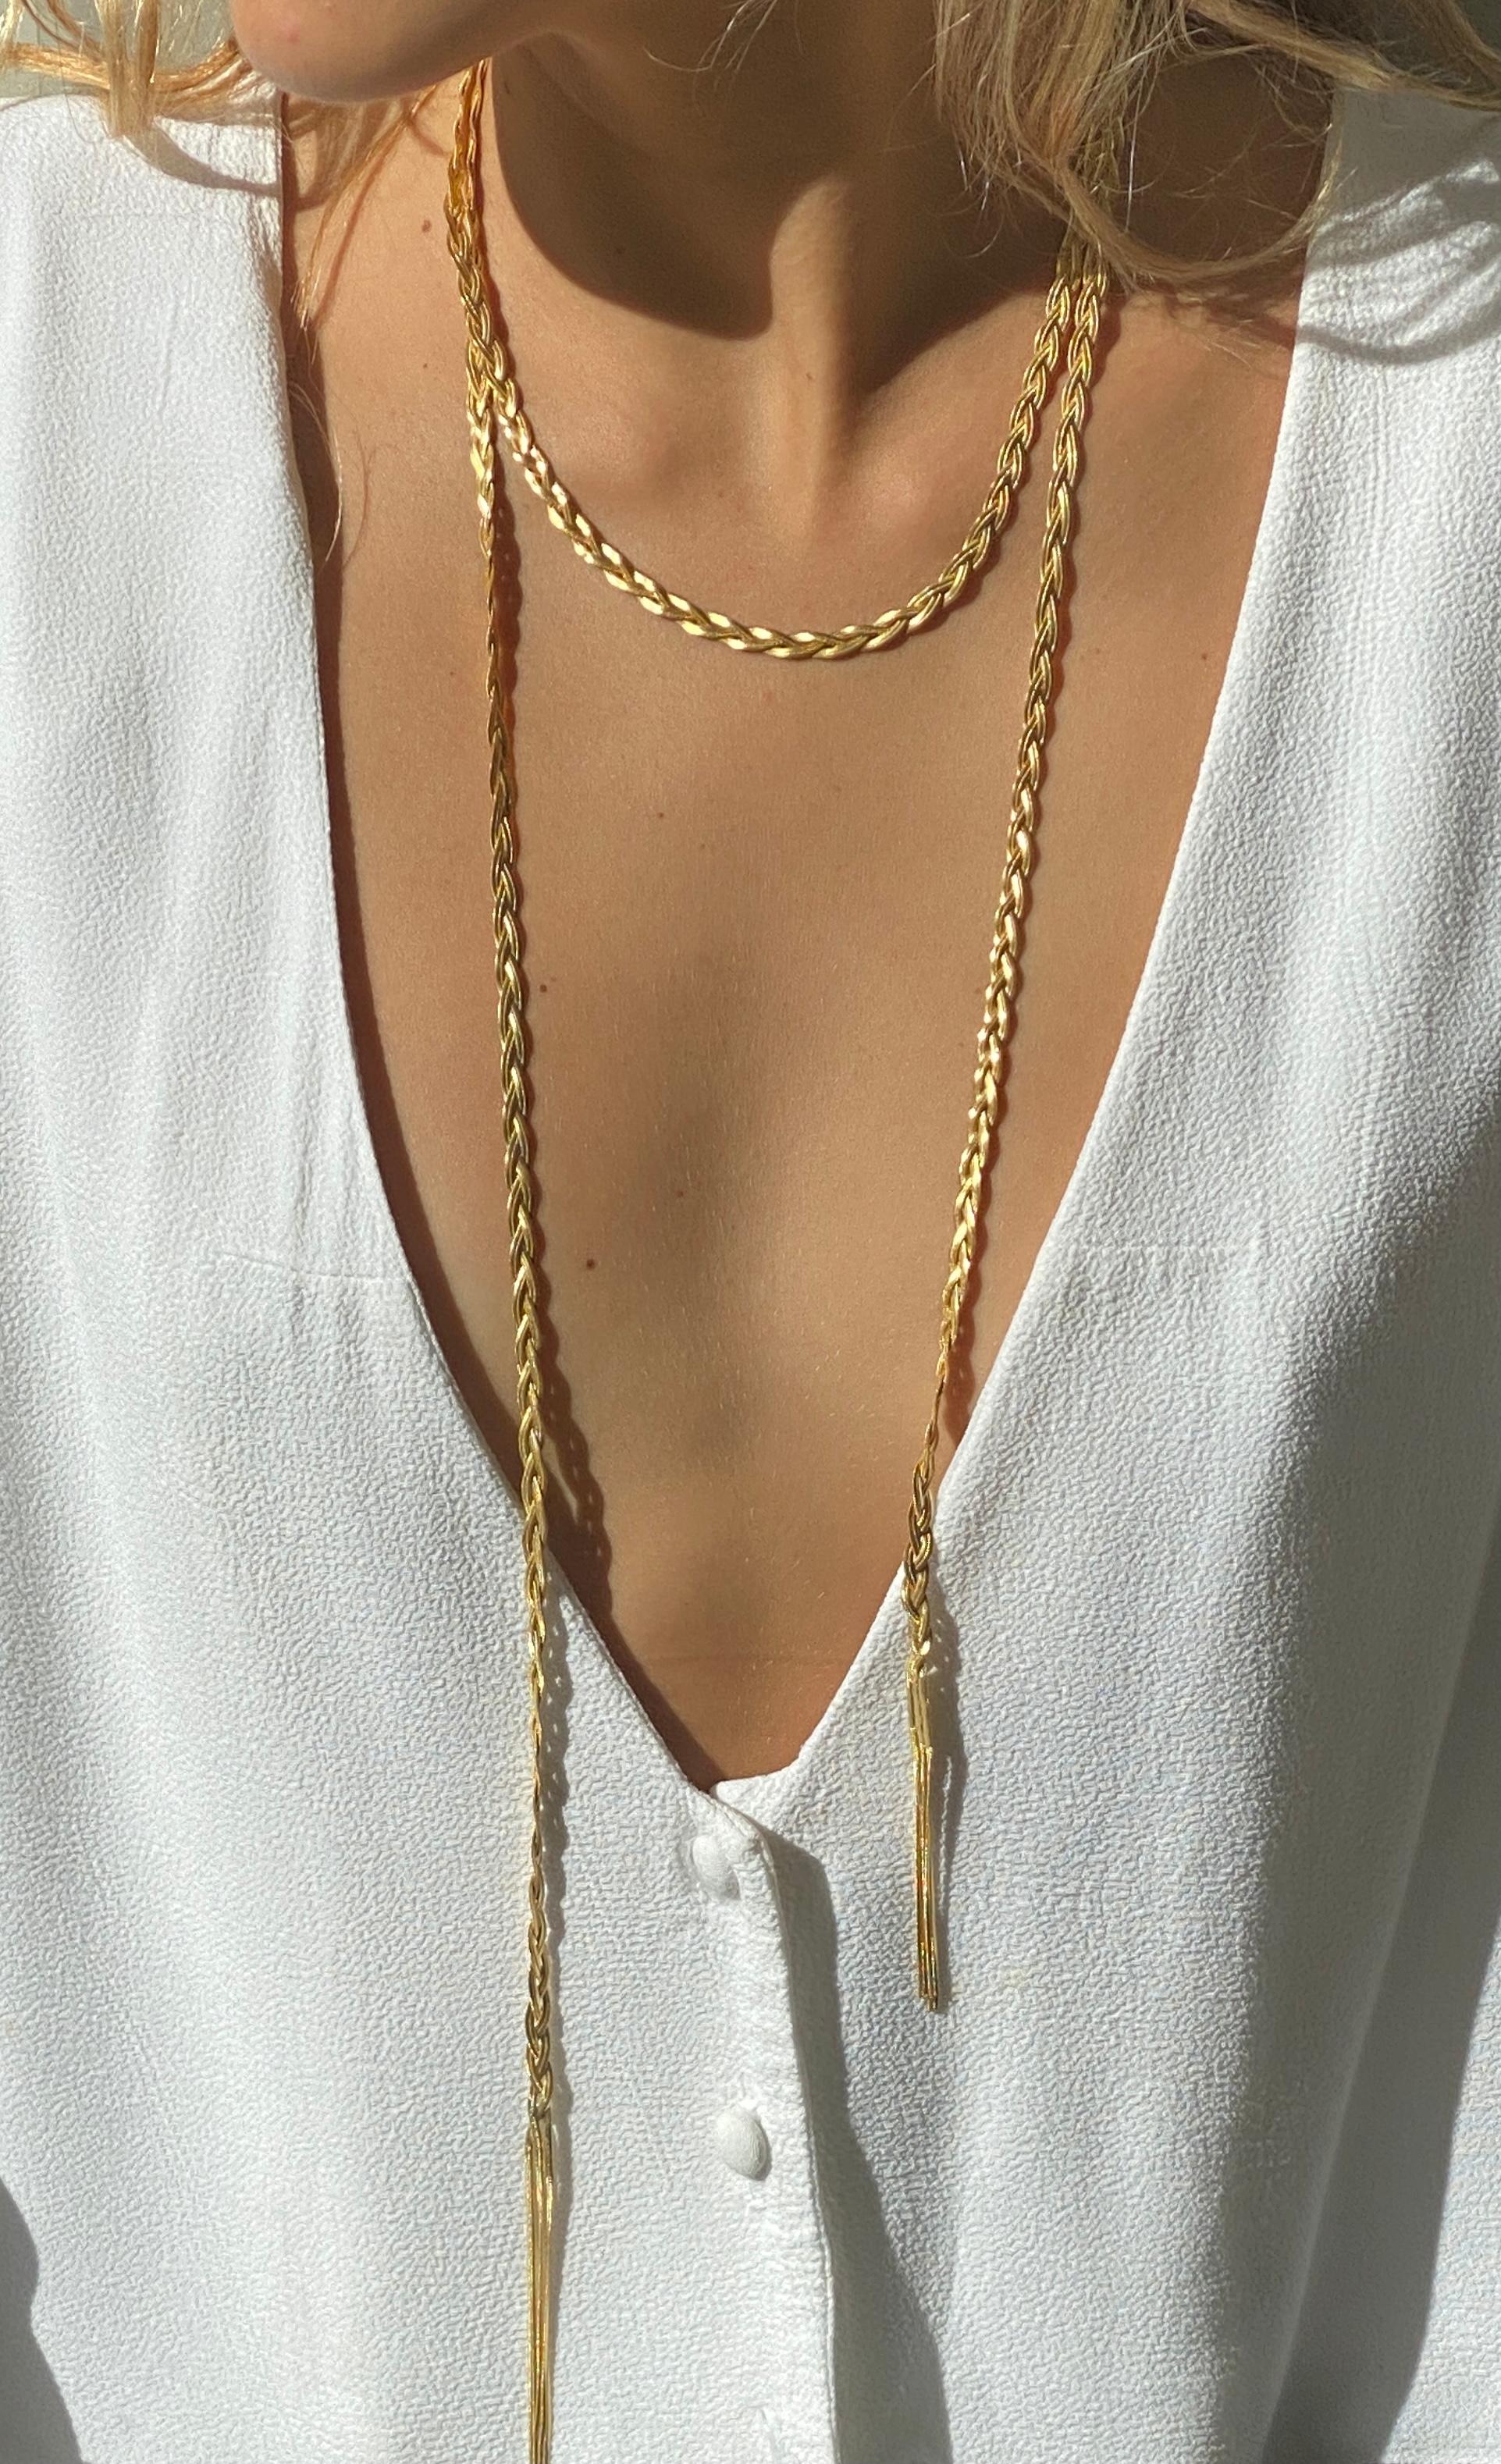 Women's Necklace Scarf Snake Chain Silver Gold-Plated Greek Jewelry For Sale